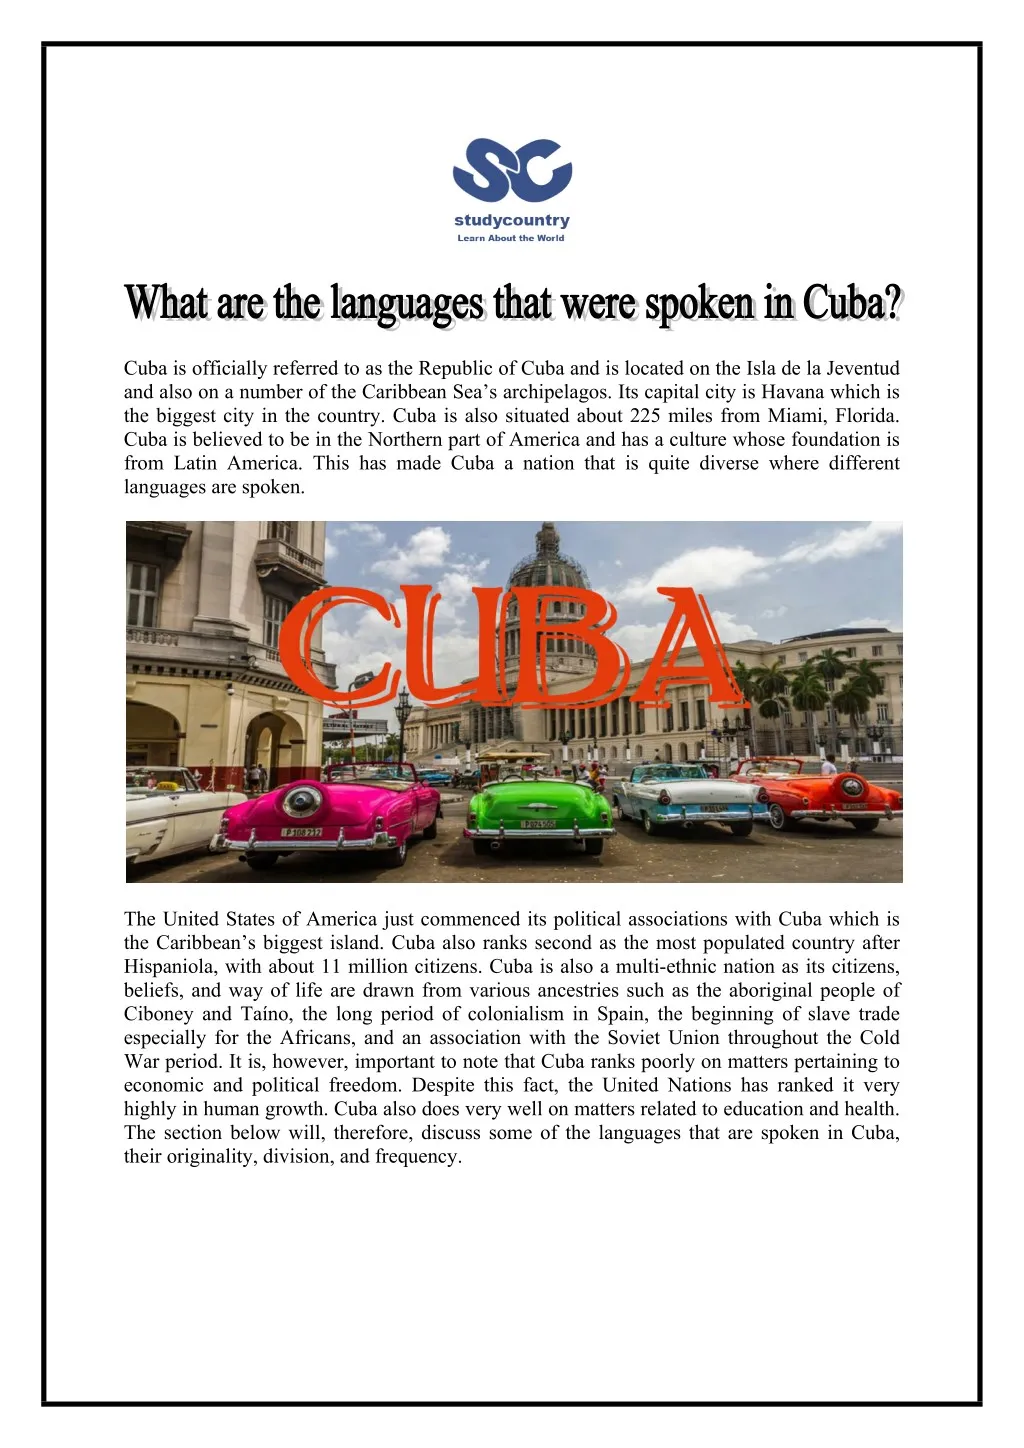 cuba is officially referred to as the republic